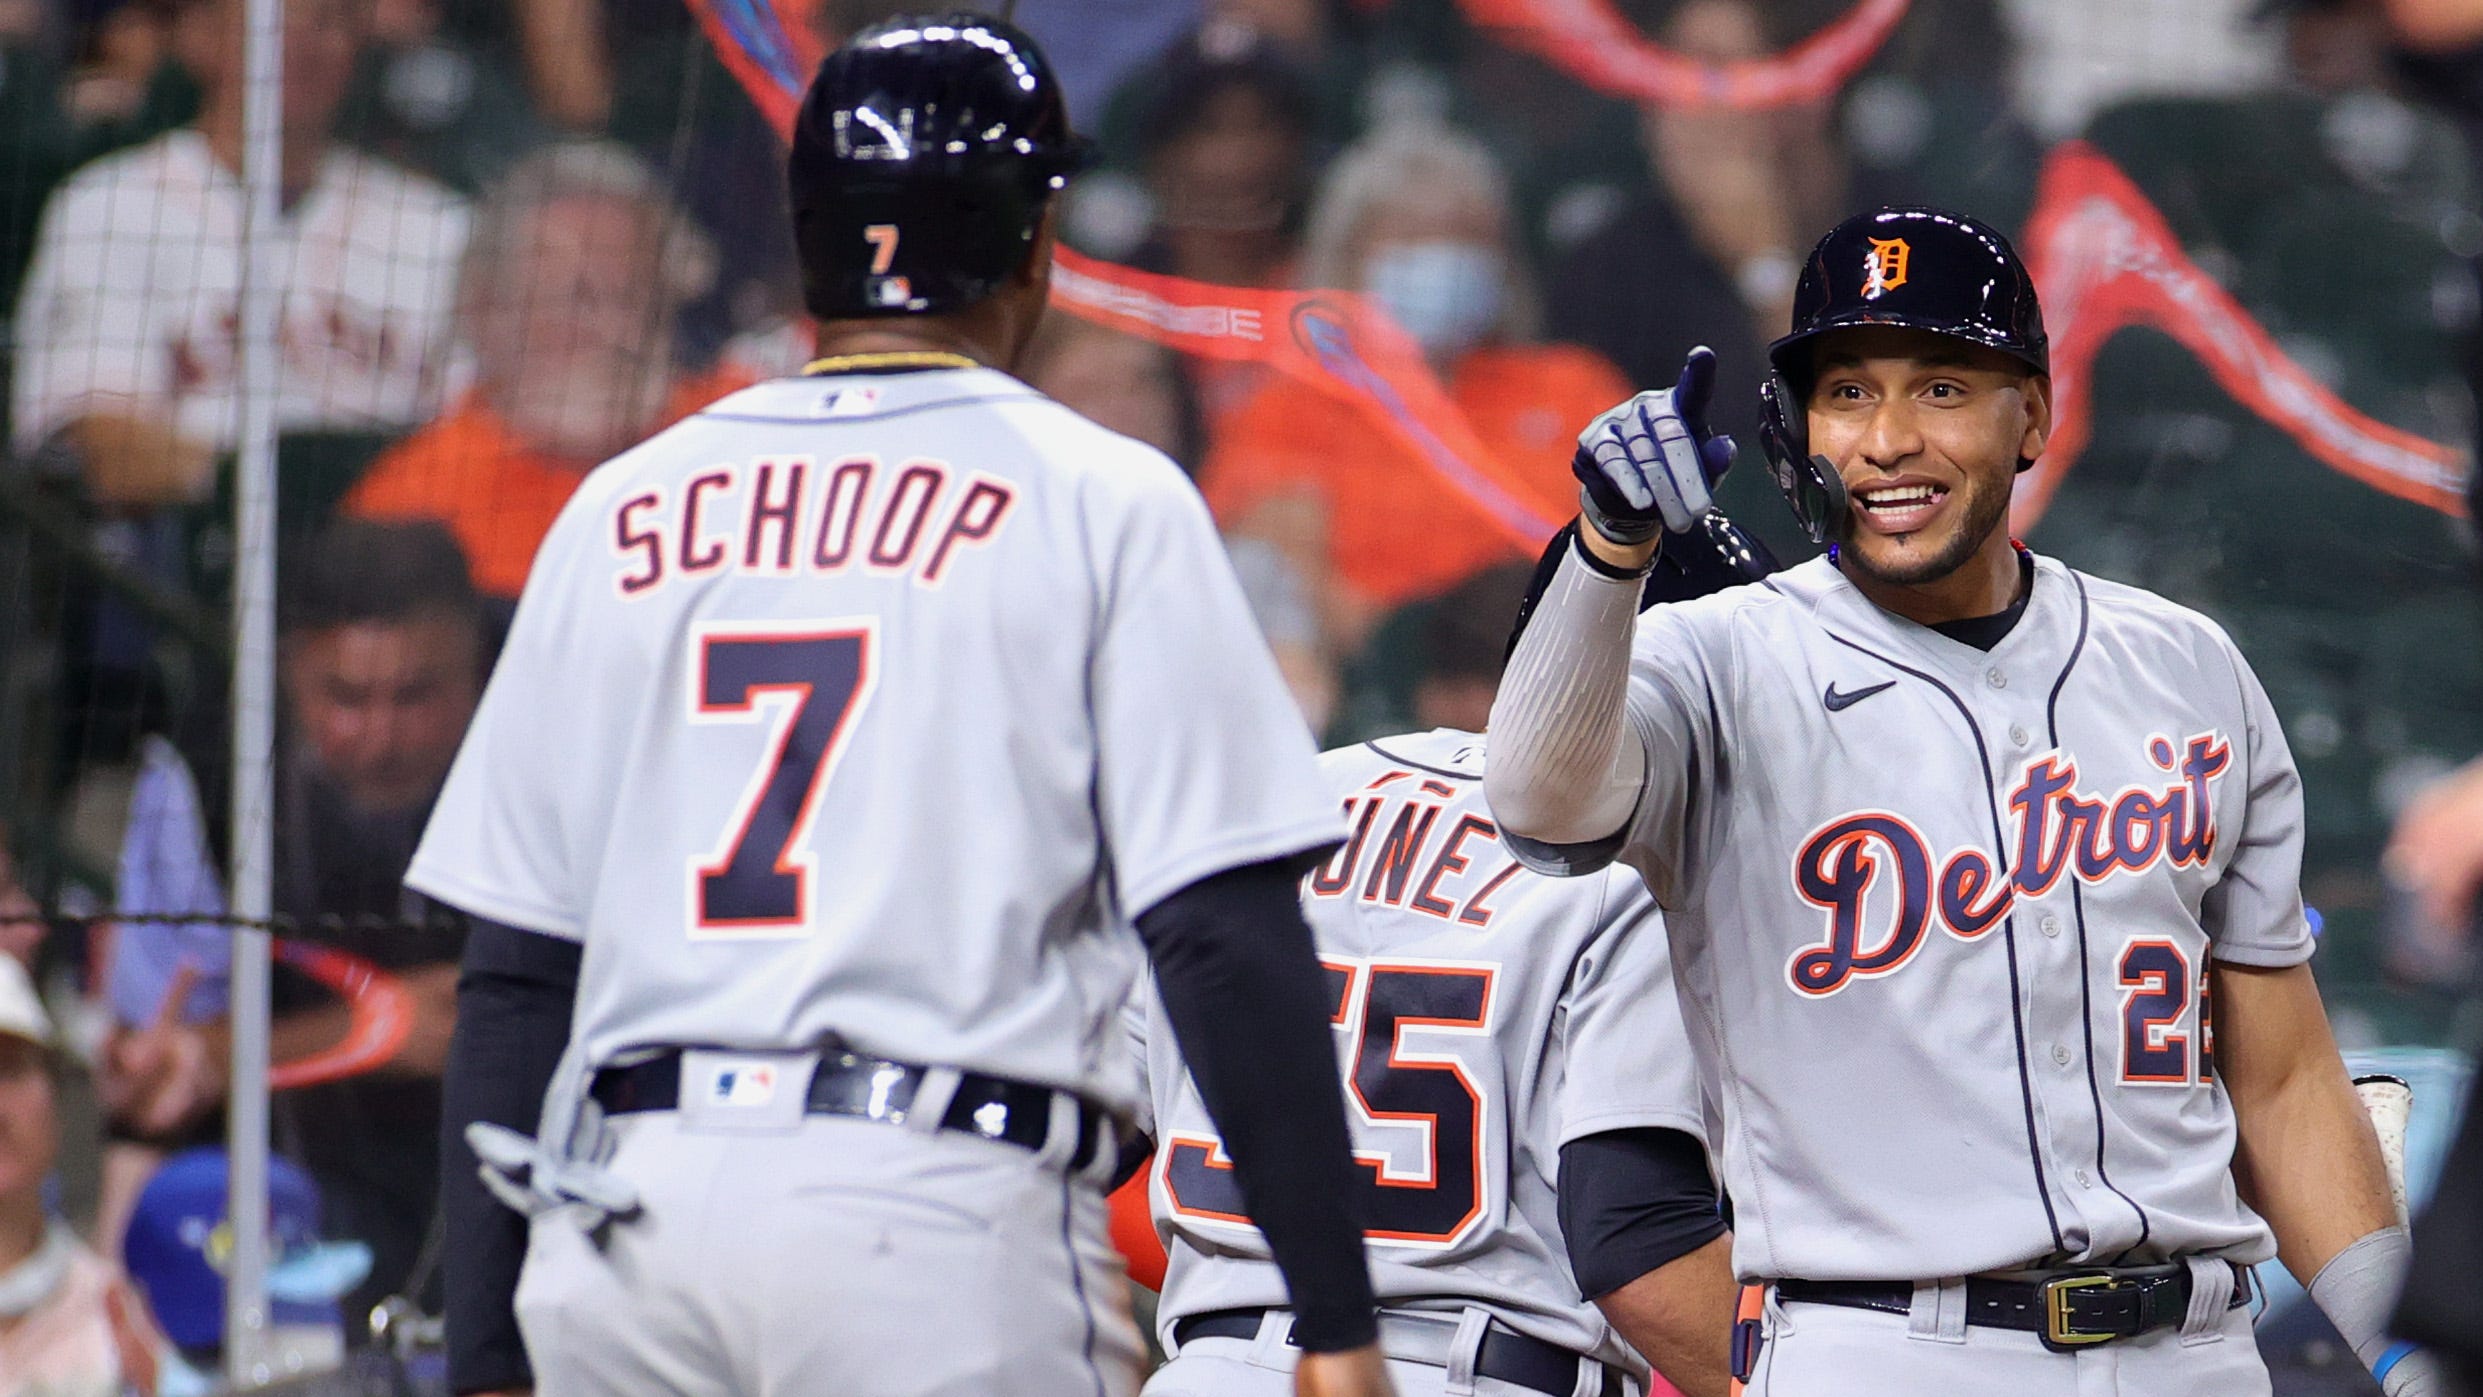 Victor Reyes #22 of the Detroit Tigers reacts with Jonathan Schoop #7 during the fourth inning against the Houston Astros at Minute Maid Park on April 13, 2021 in Houston, Texas.